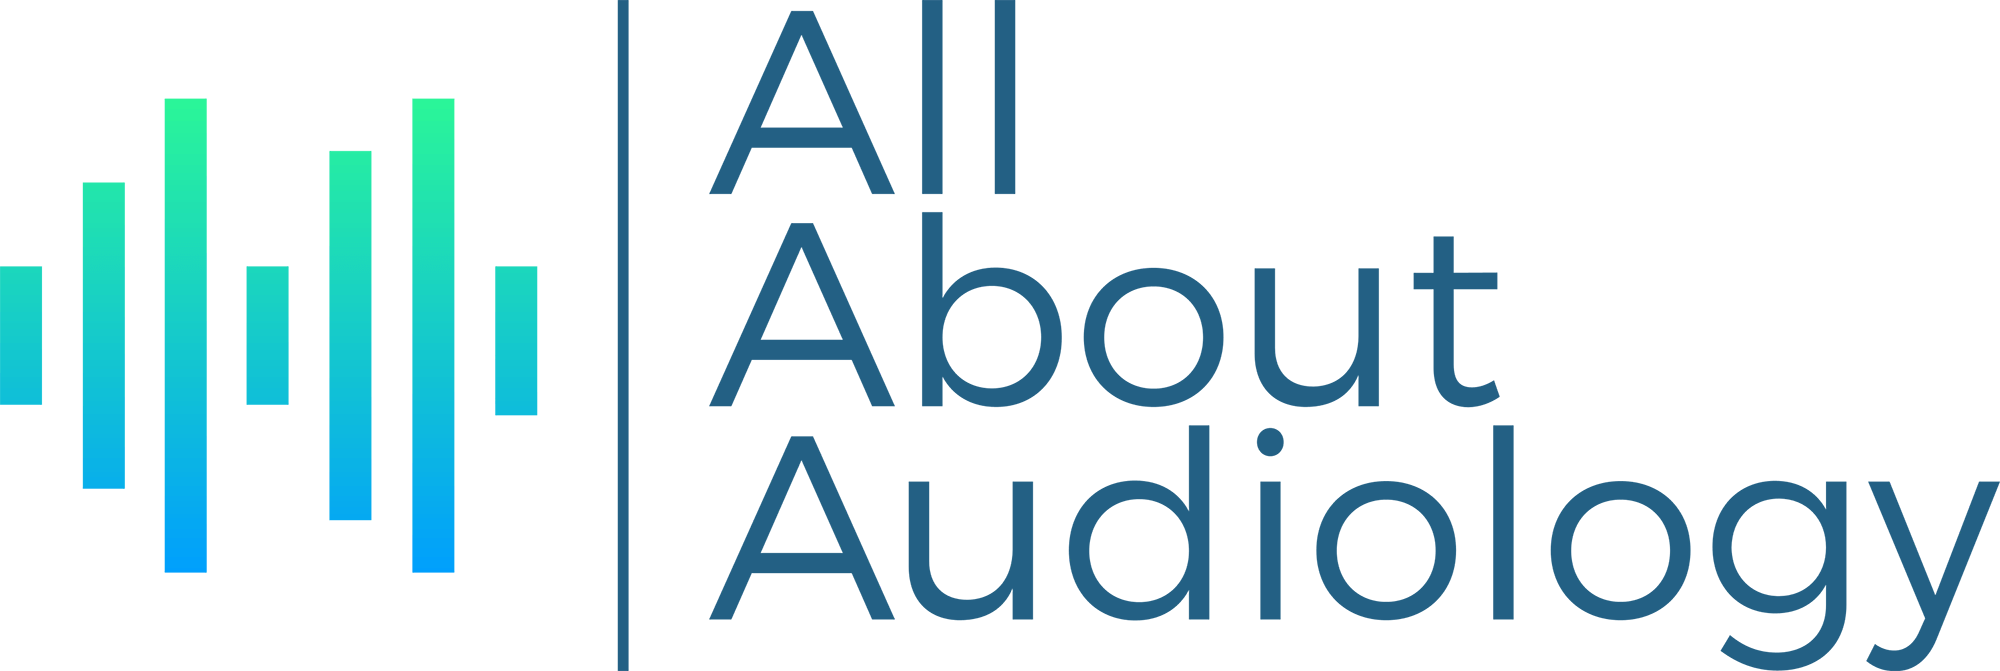 All About Audiology Logo